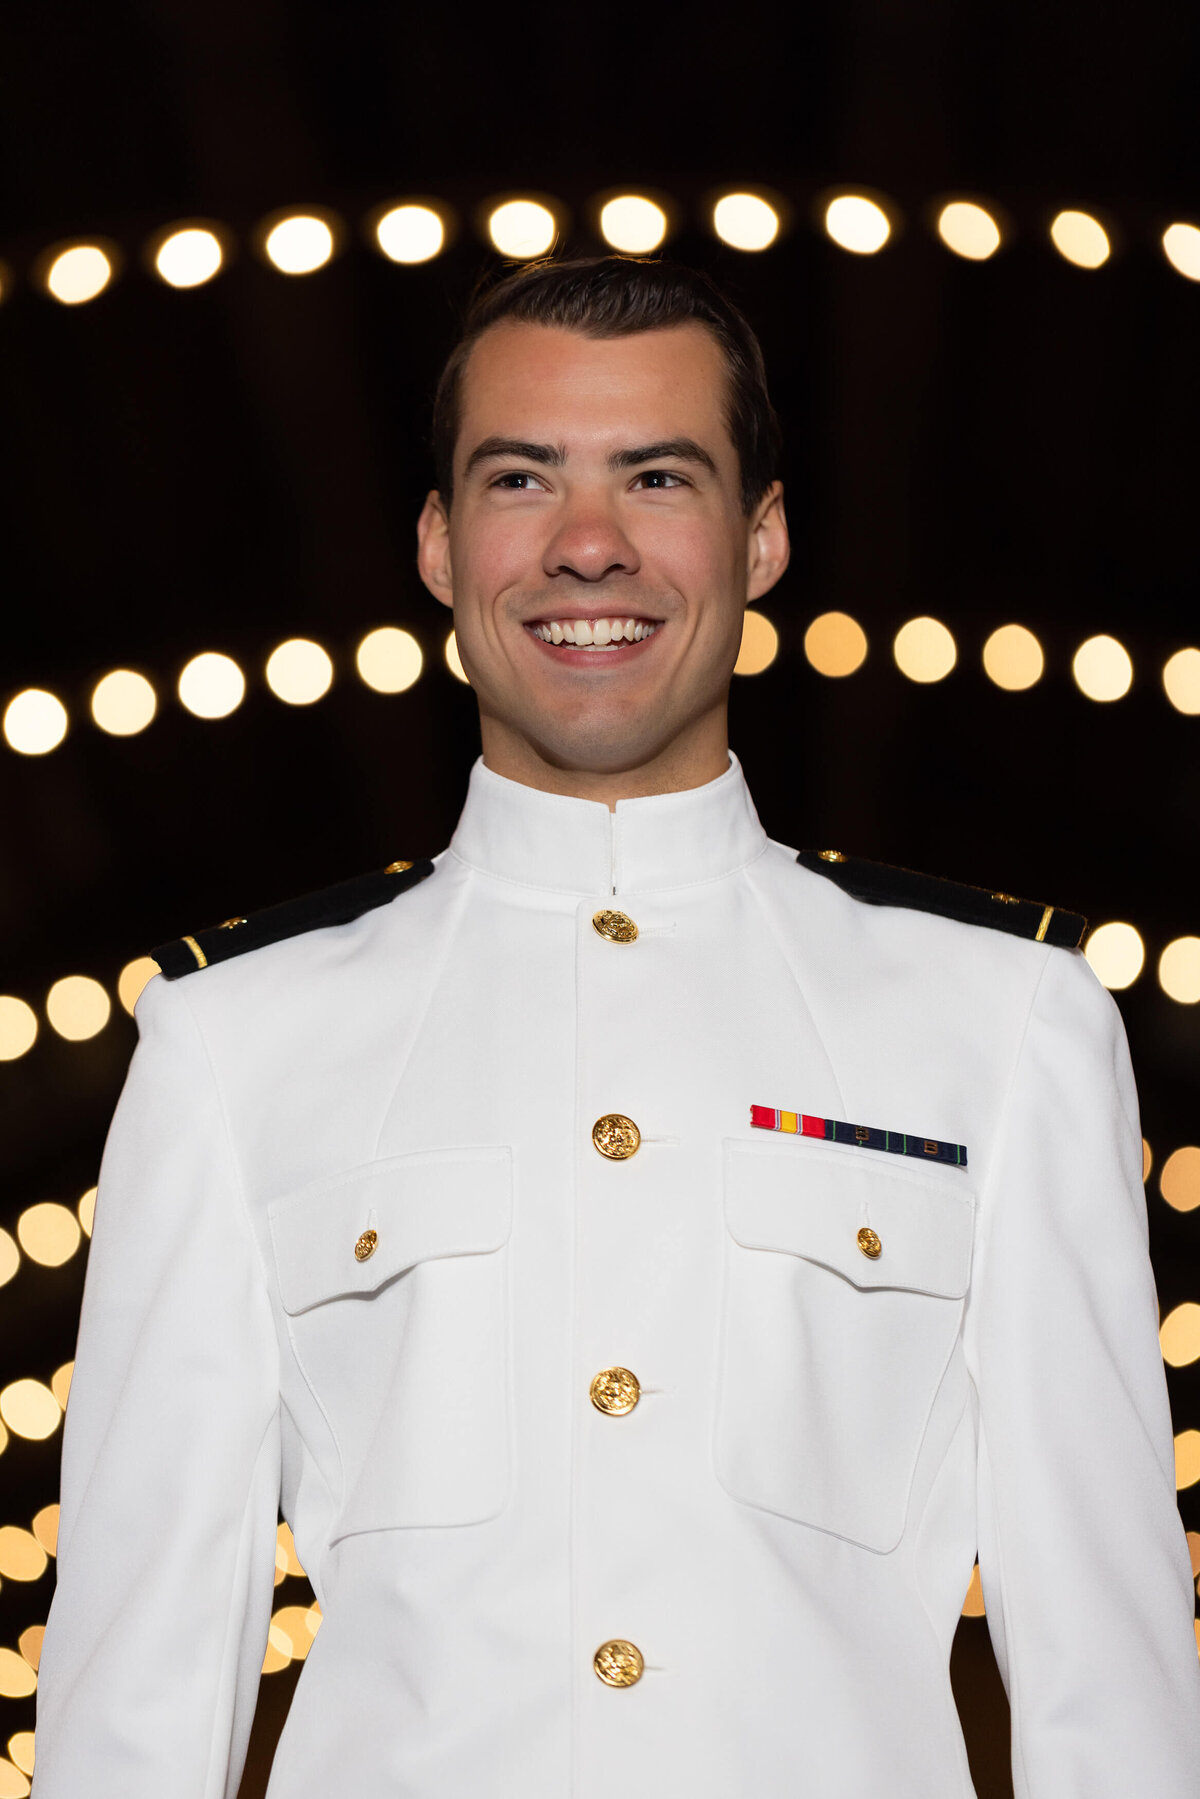 Naval Academy senior smiles in a portrait with the lights from Dahlgren Hall.